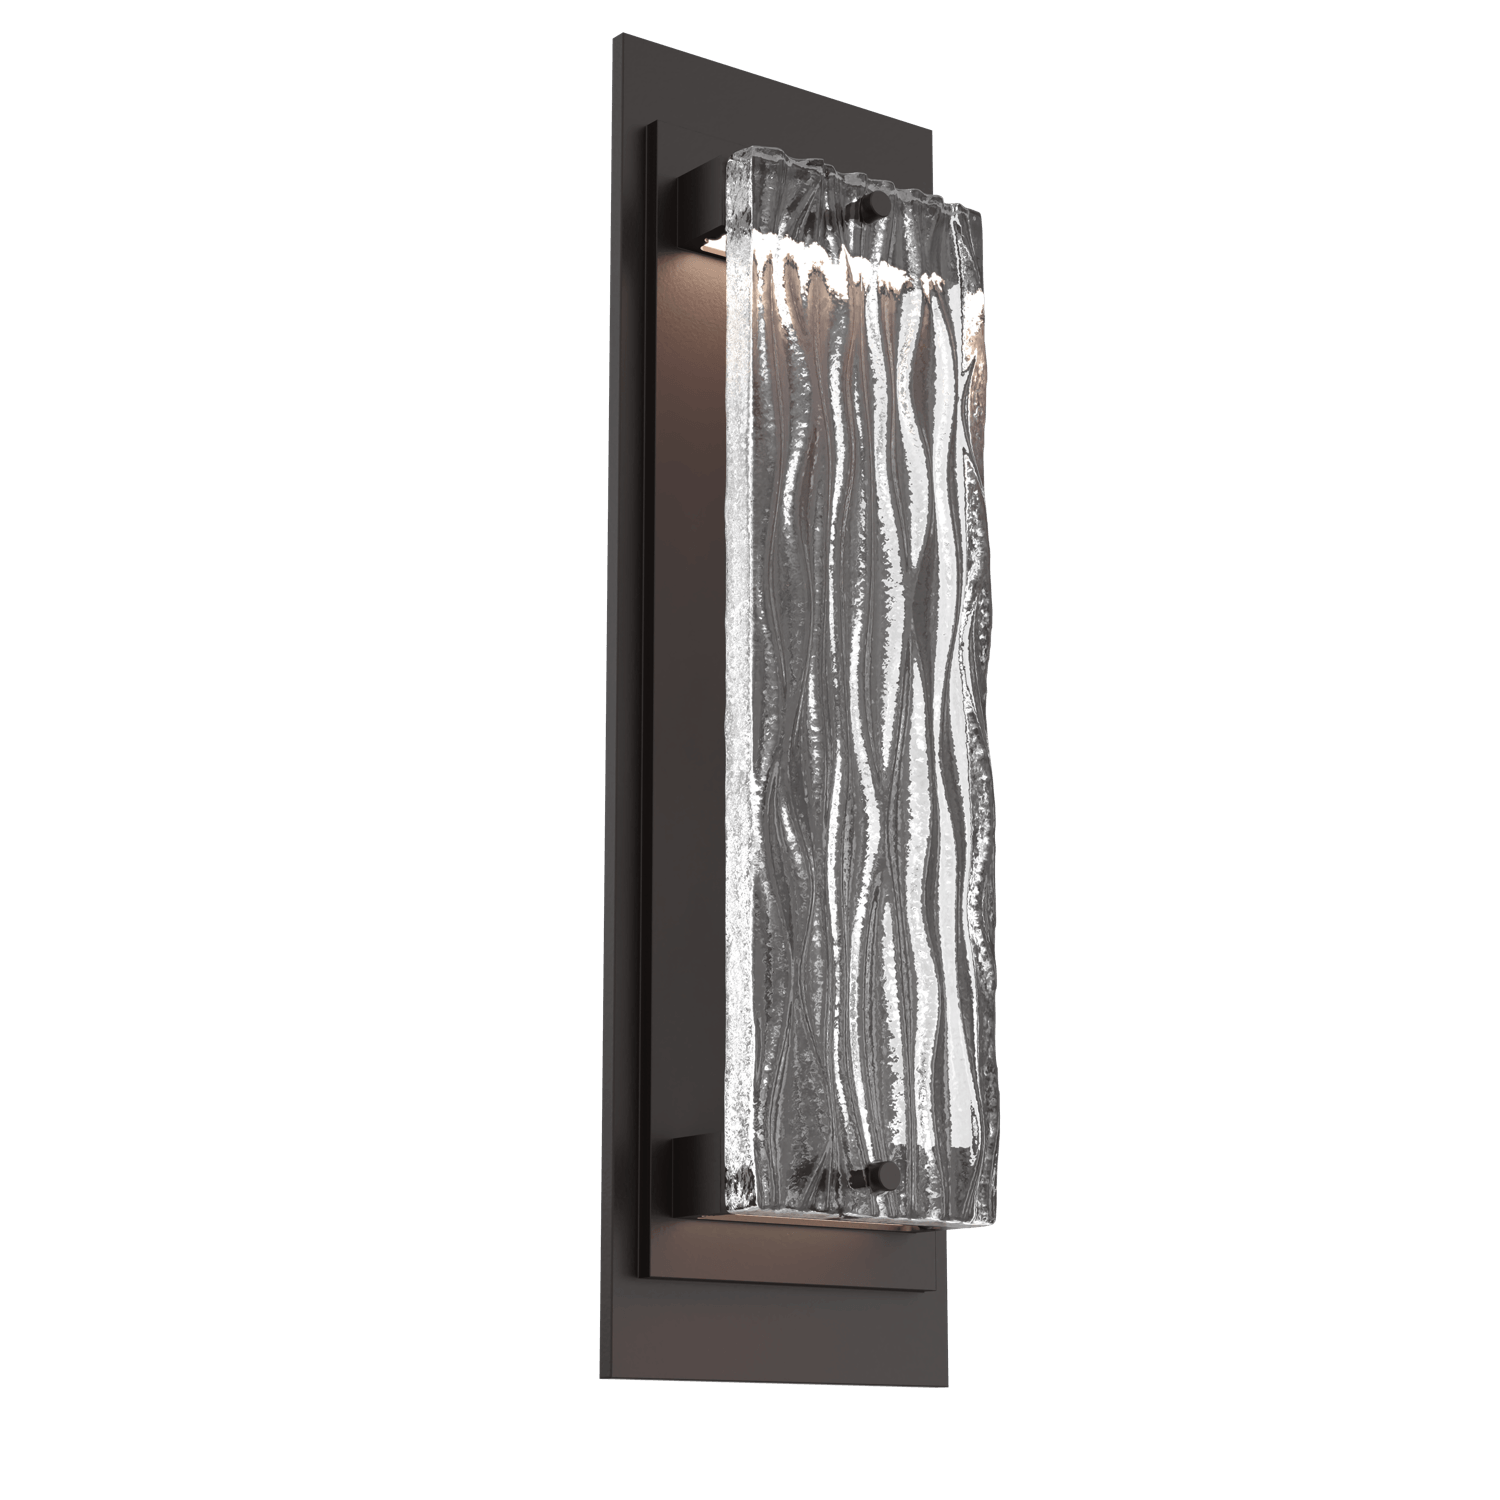 ODB0090-01-SB-TT-Hammerton-Studio-Tabulo-22-inch-outdoor-sconce-with-statuary-bronze-finish-and-clear-tidal-cast-glass-shade-and-LED-lamping